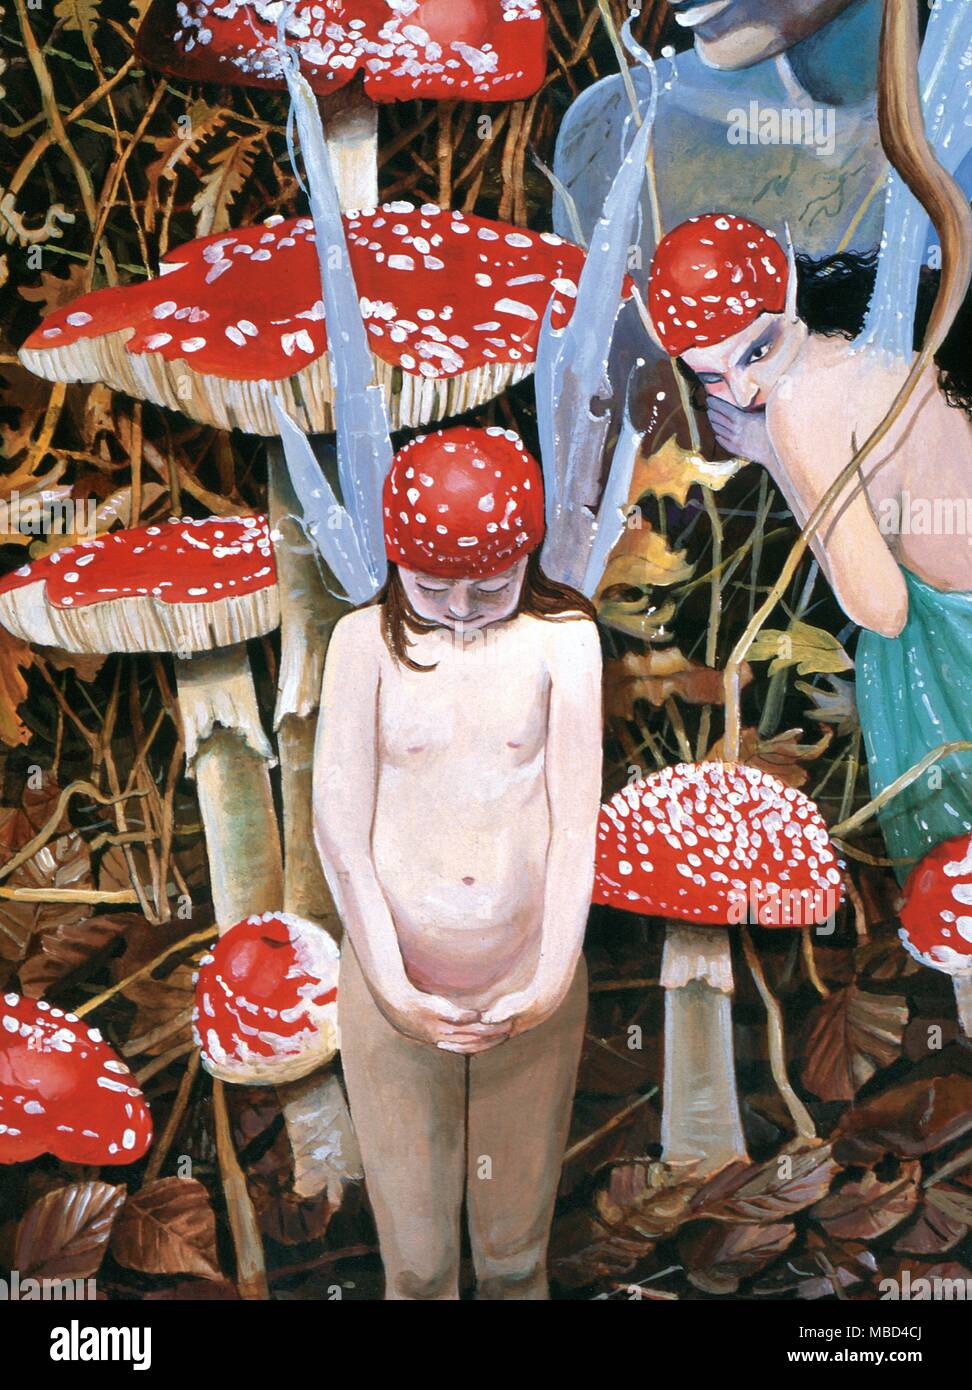 Aminita Muscaria'. One of a series of paintings by Gordon Wain relating to the subject of 'magic mushrooms' and hallucigenics. *** Local Caption *** 'Aminita Muscaria', by Gordon Wain Stock Photo